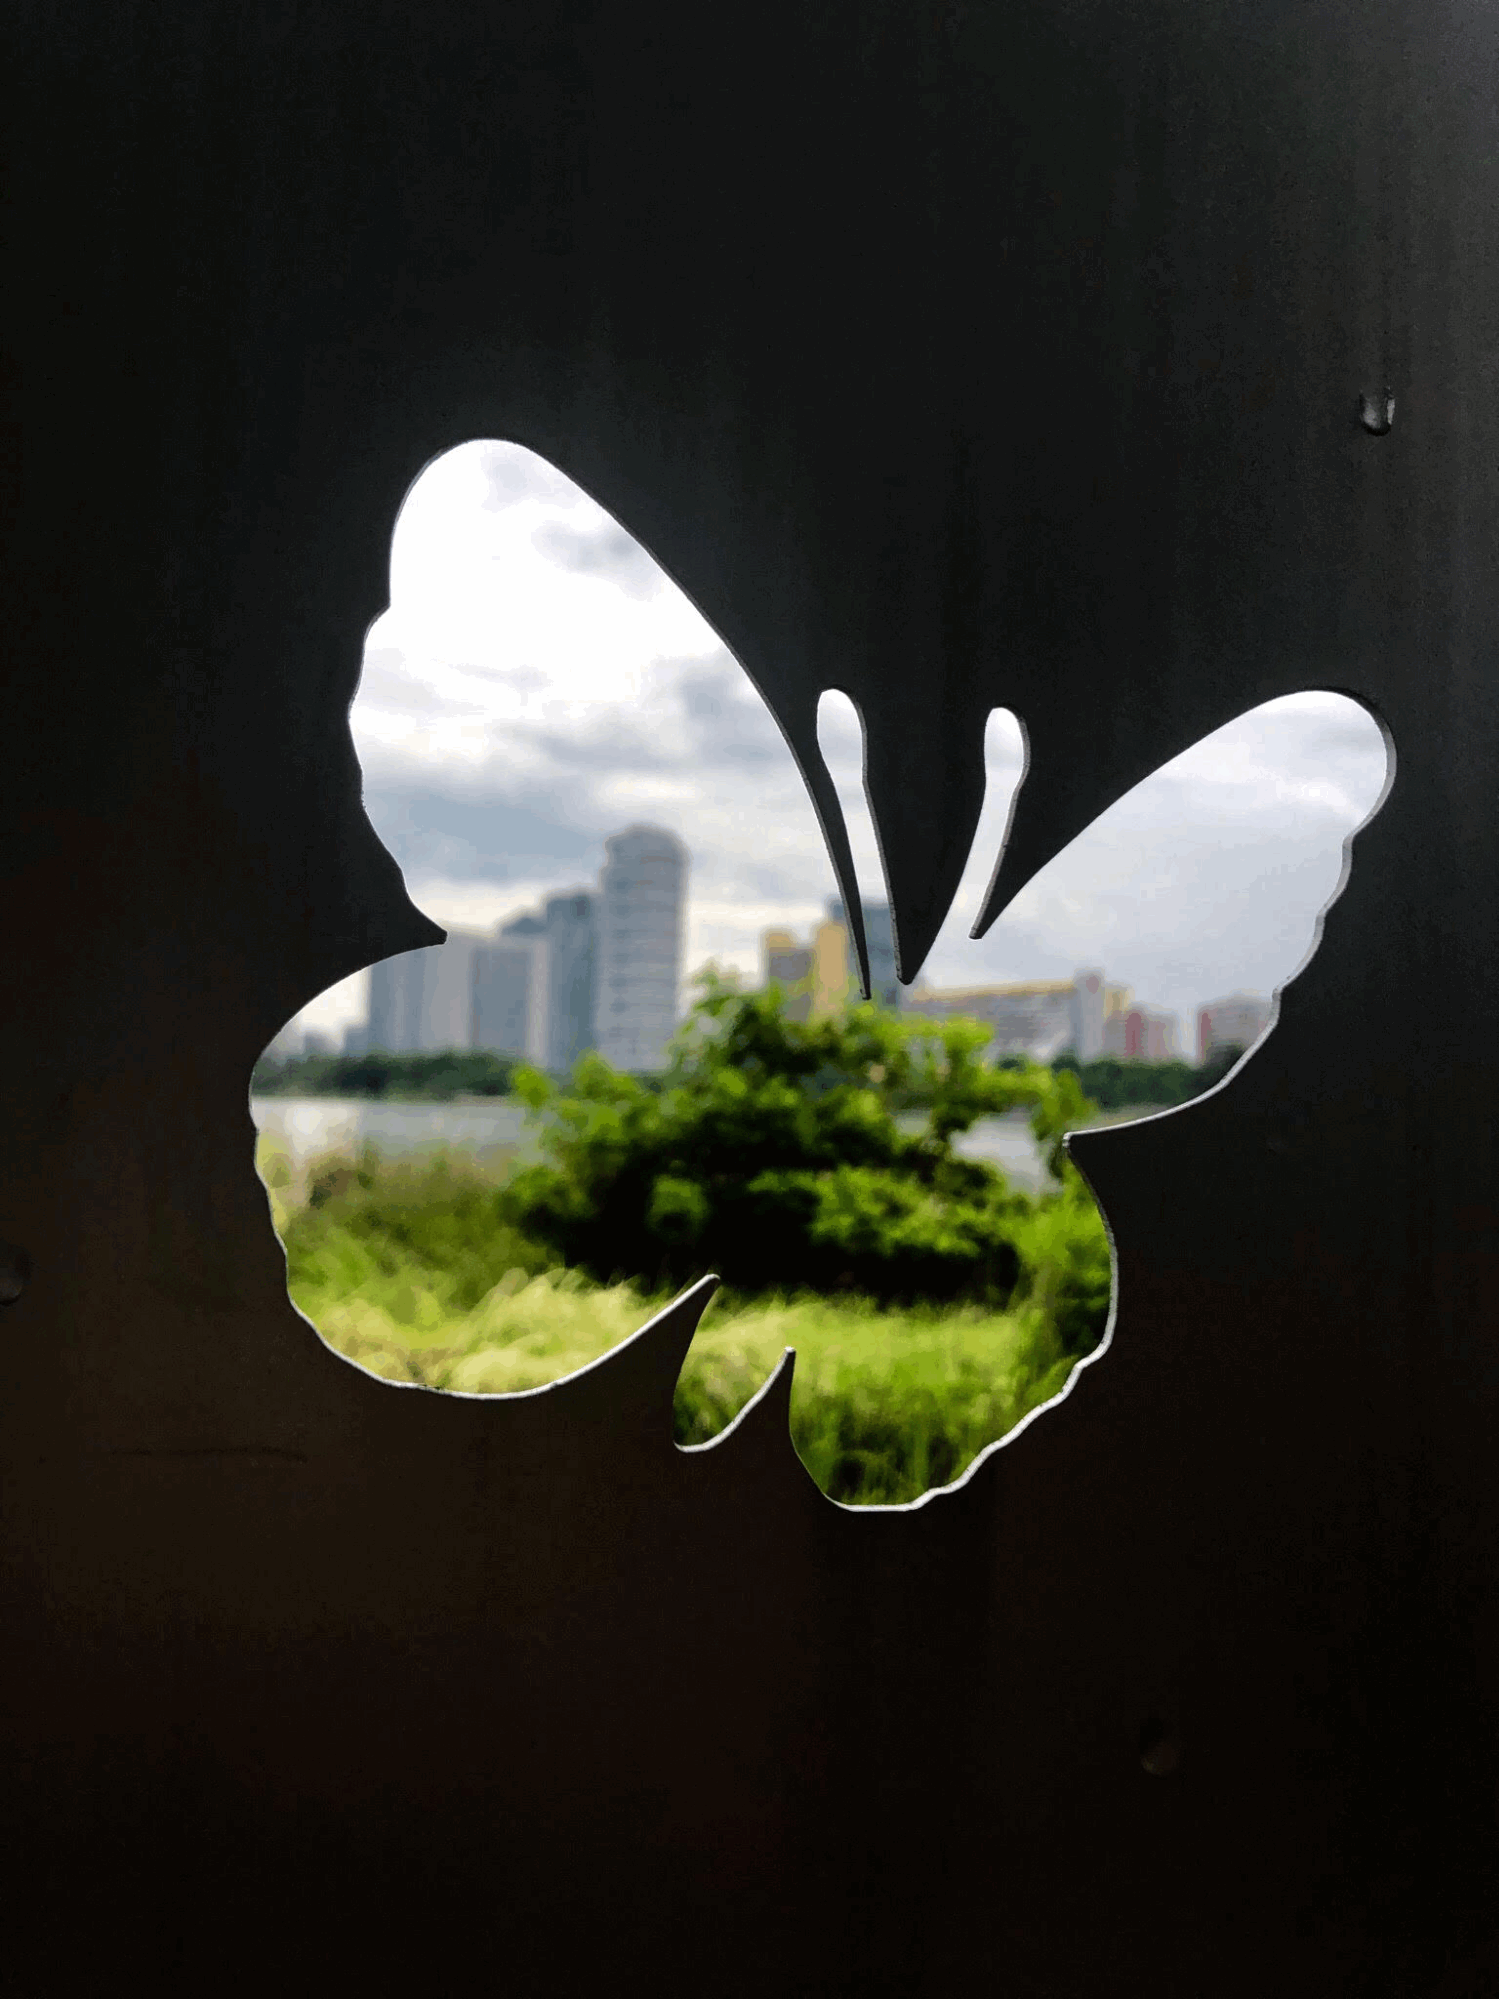 capturing the lush greenery through butterfly cut-outs